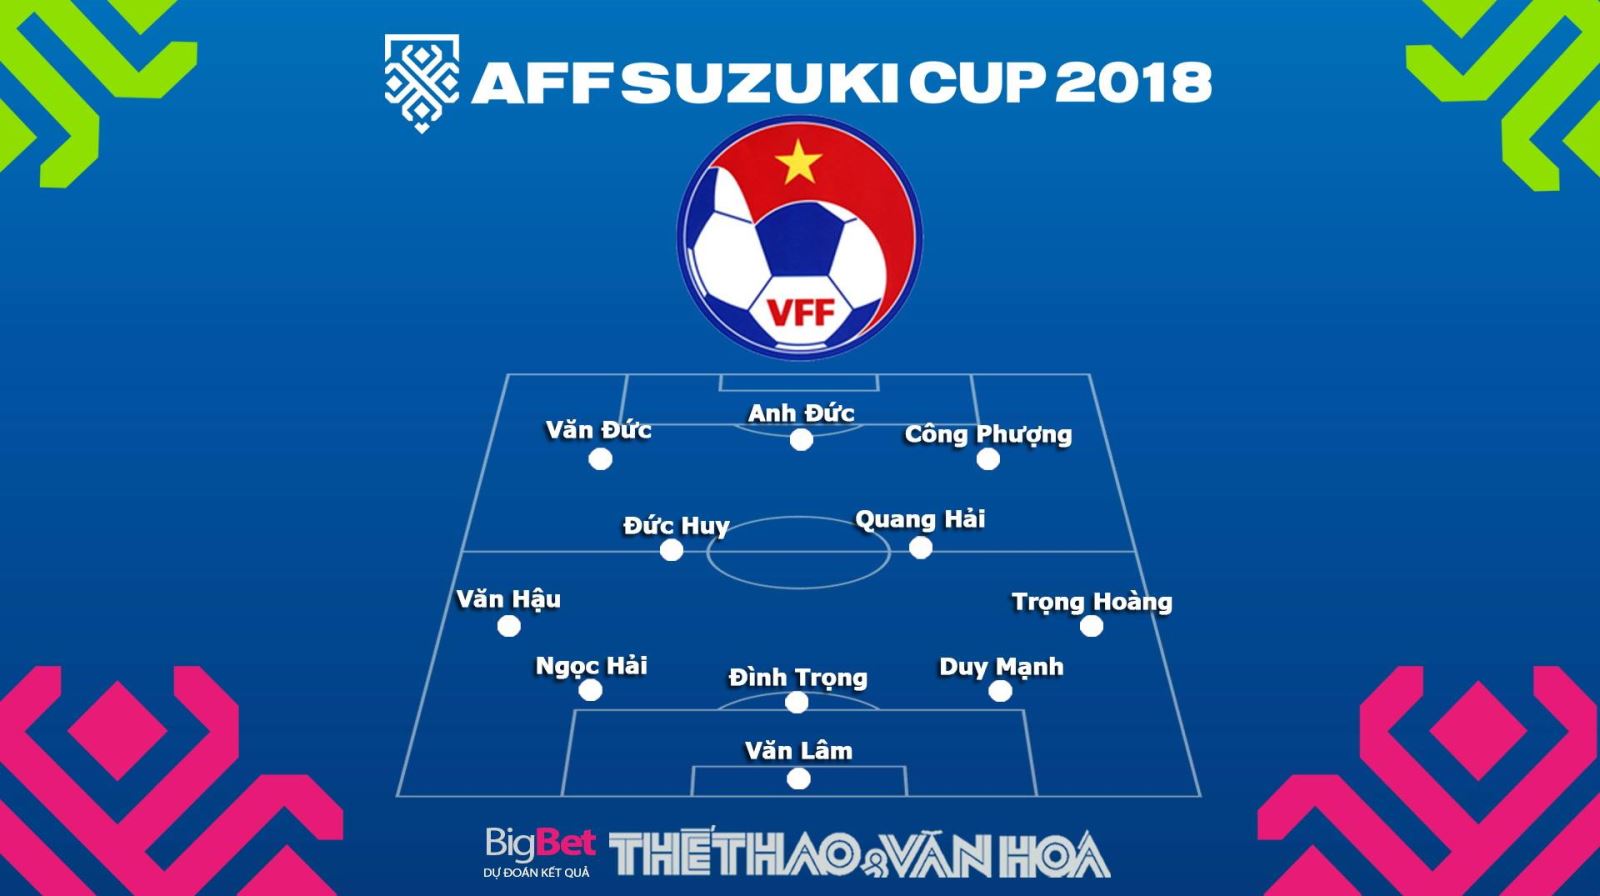 AFF Cup, AFF Cup 2018, Lịch thi đấu AFF Cup, lịch thi đấu aff cup 2018, lịch aff cup 2018, lịch thi đấu bóng đá, lịch thi đấu bóng đá hôm nay, lịch thi đấu AFF Suzuki Cup 2018